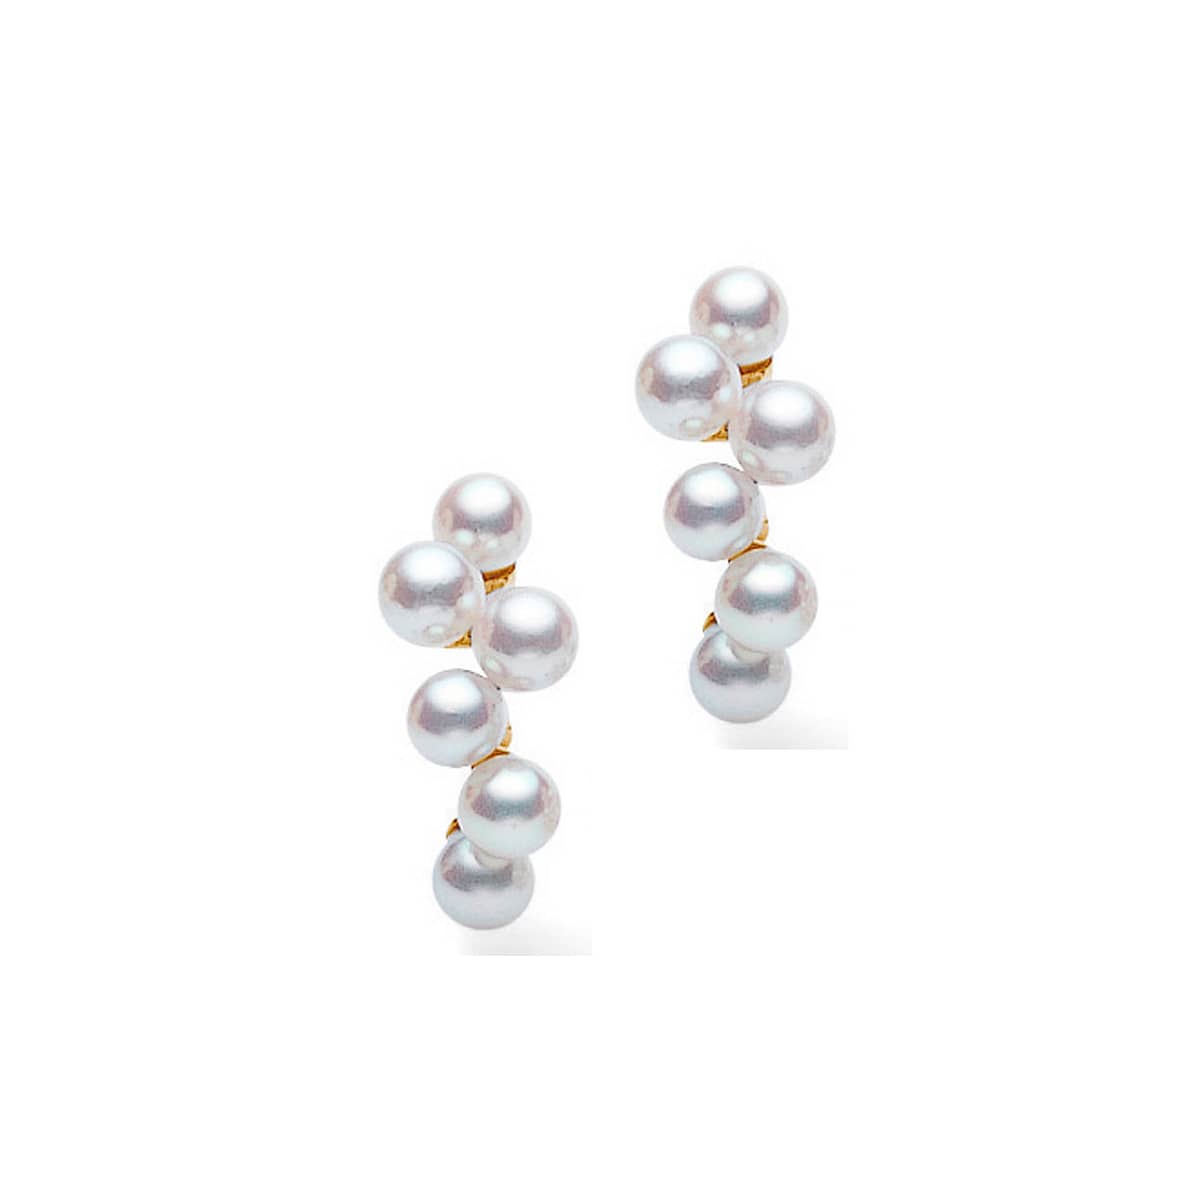 Six naturally beautiful pearls are cluster set in an 18K yellow gold, drop stud earring. A modern adaption of the classic pearl stud earring, these fine studs feature pearls between 3.25mm and 3.5mm.